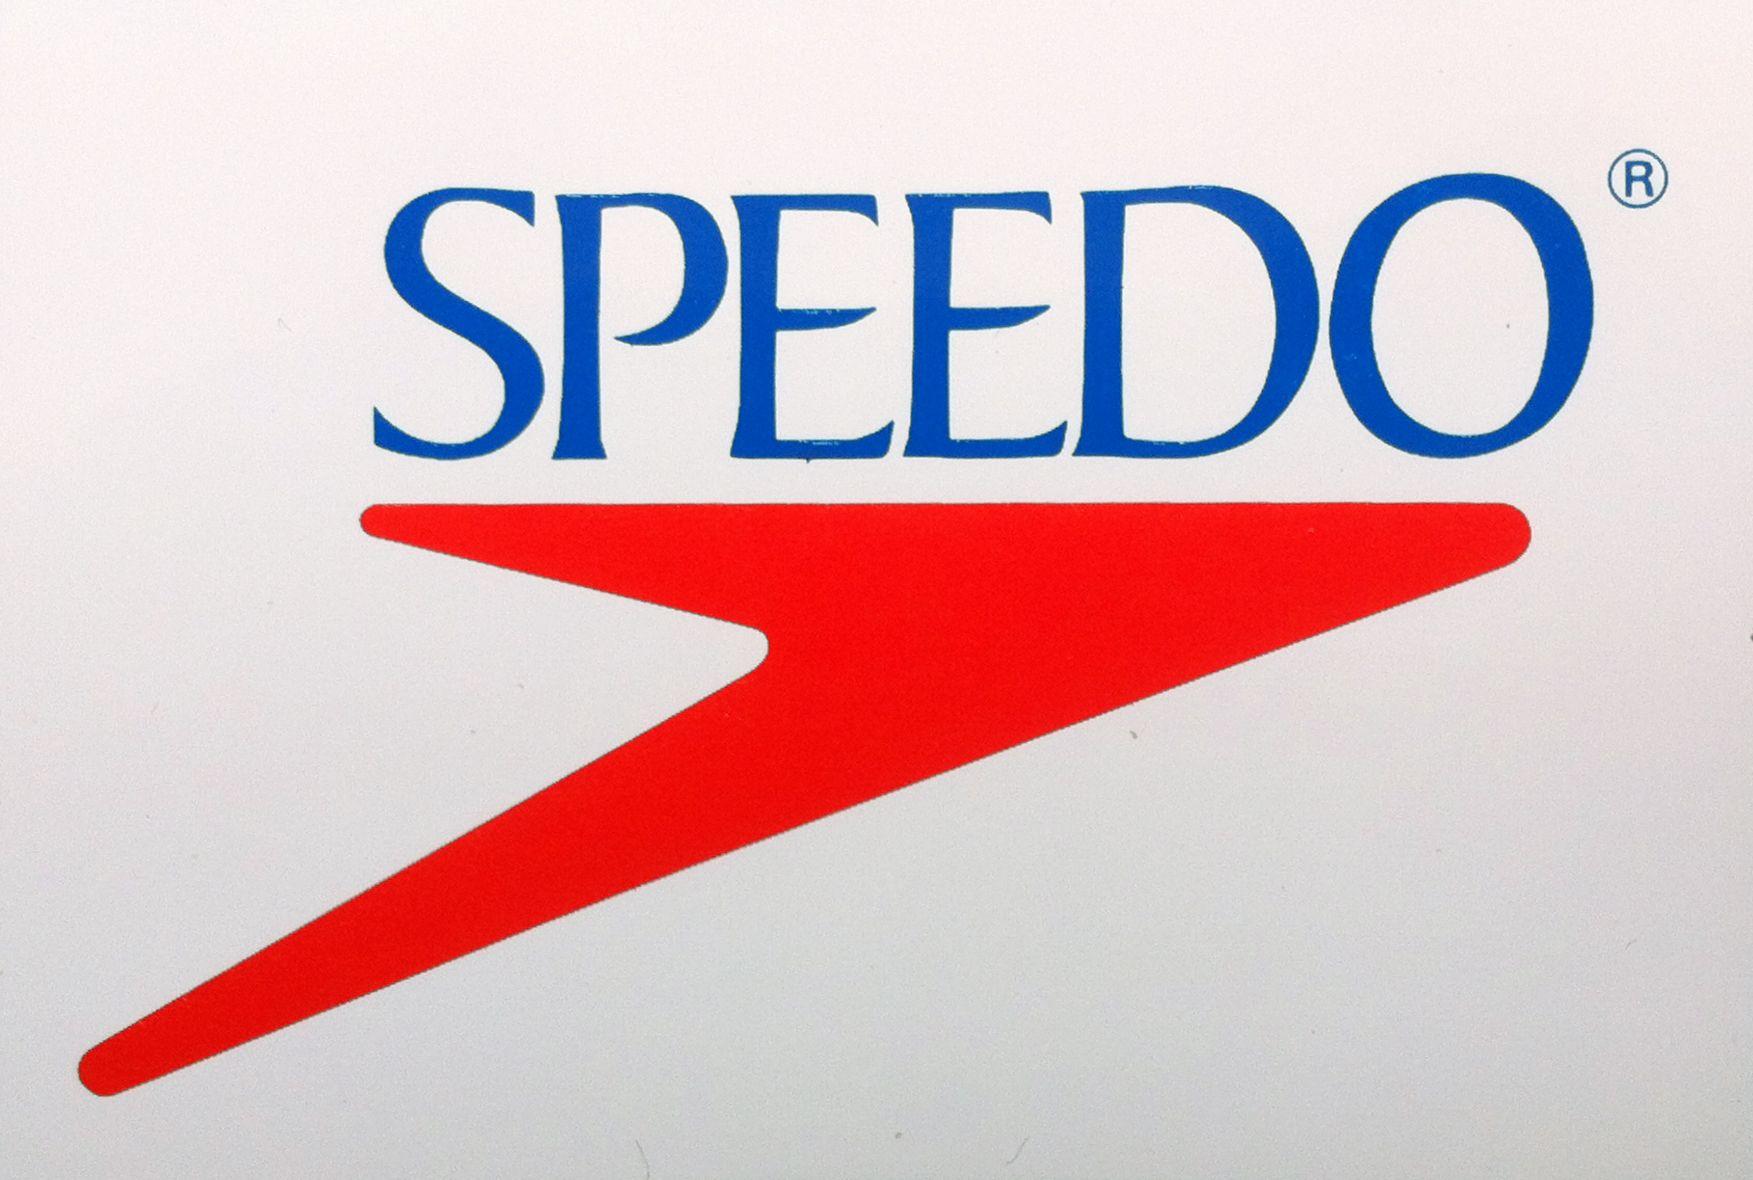 1990s Logo - Speedo logo and magazine ad (1990s) - Fonts In Use